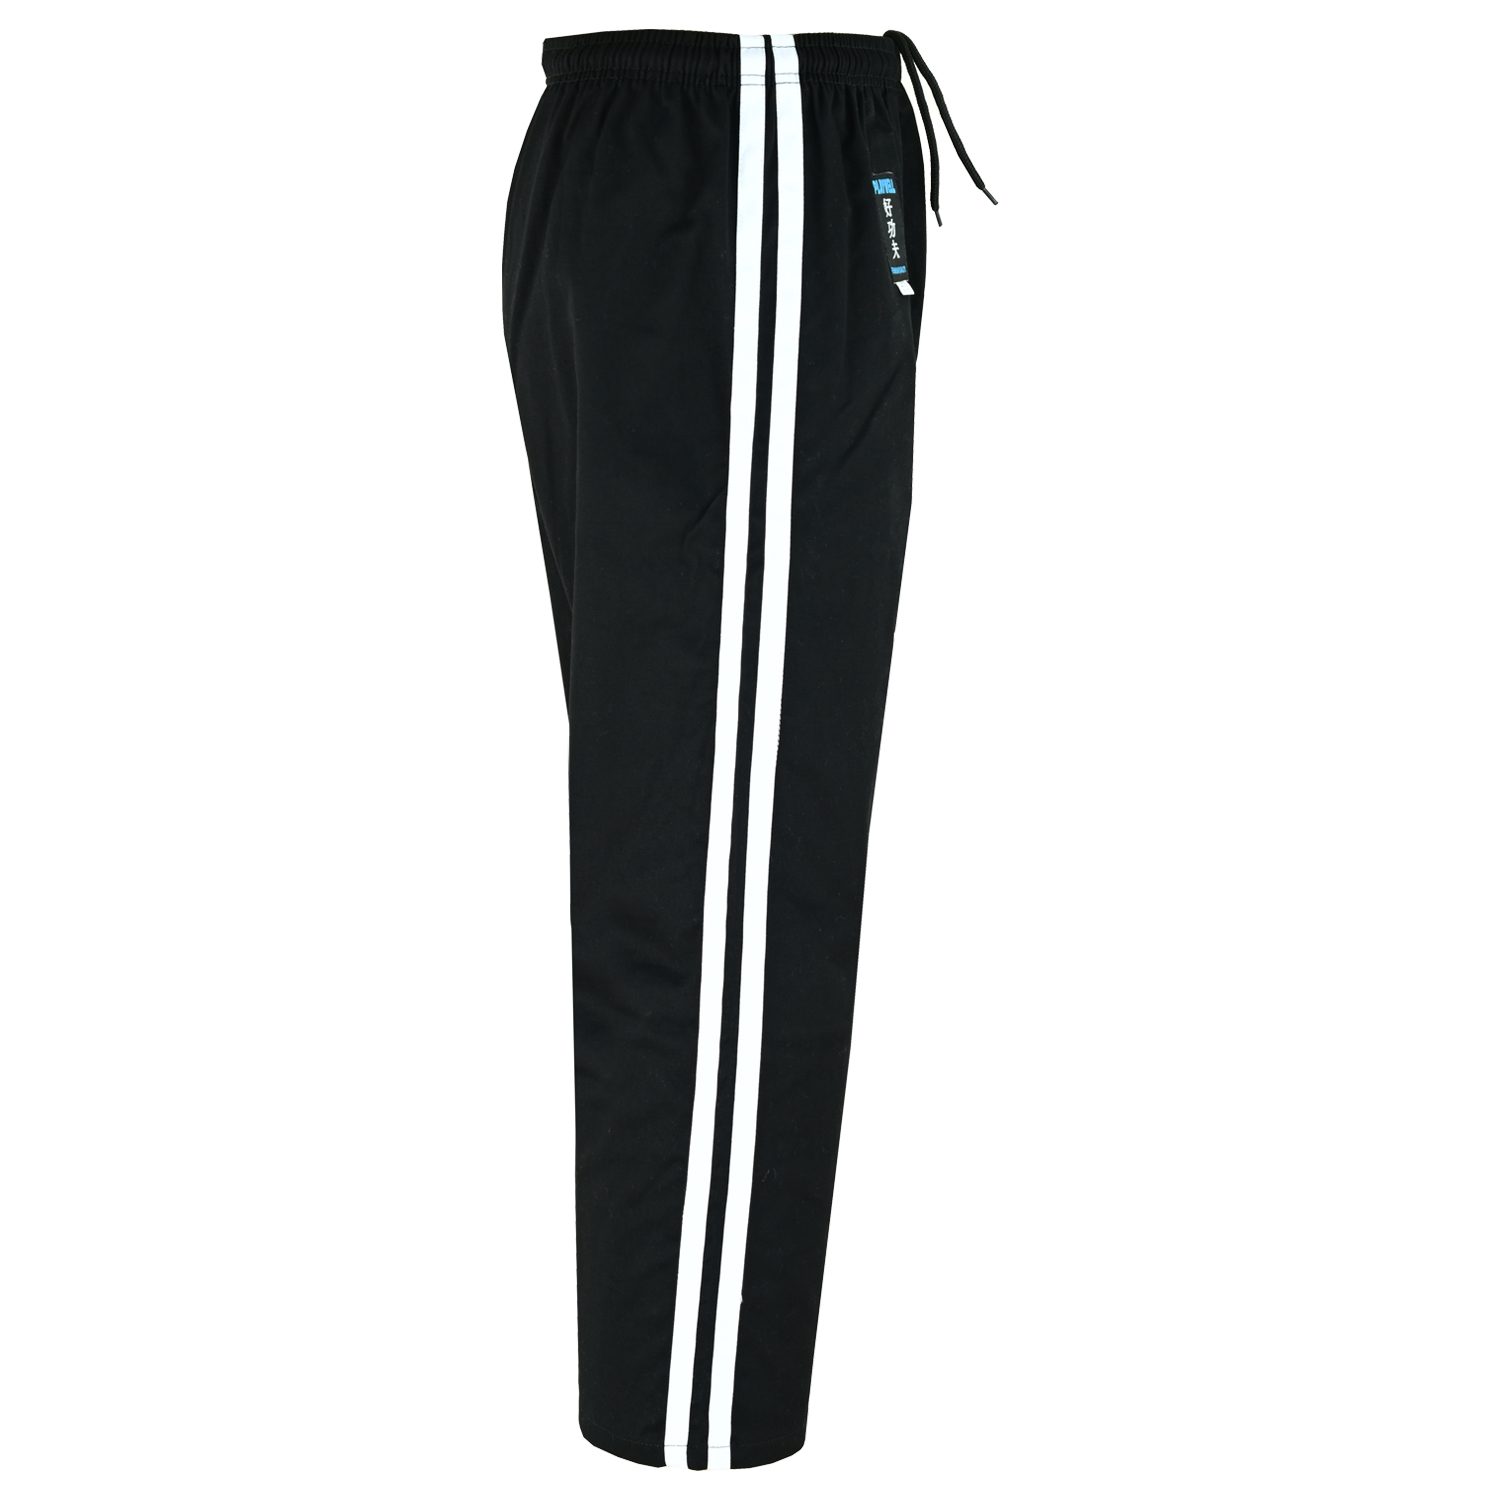 Full Contact Trousers - Black W/ 2 White Stripes Cotton - Click Image to Close